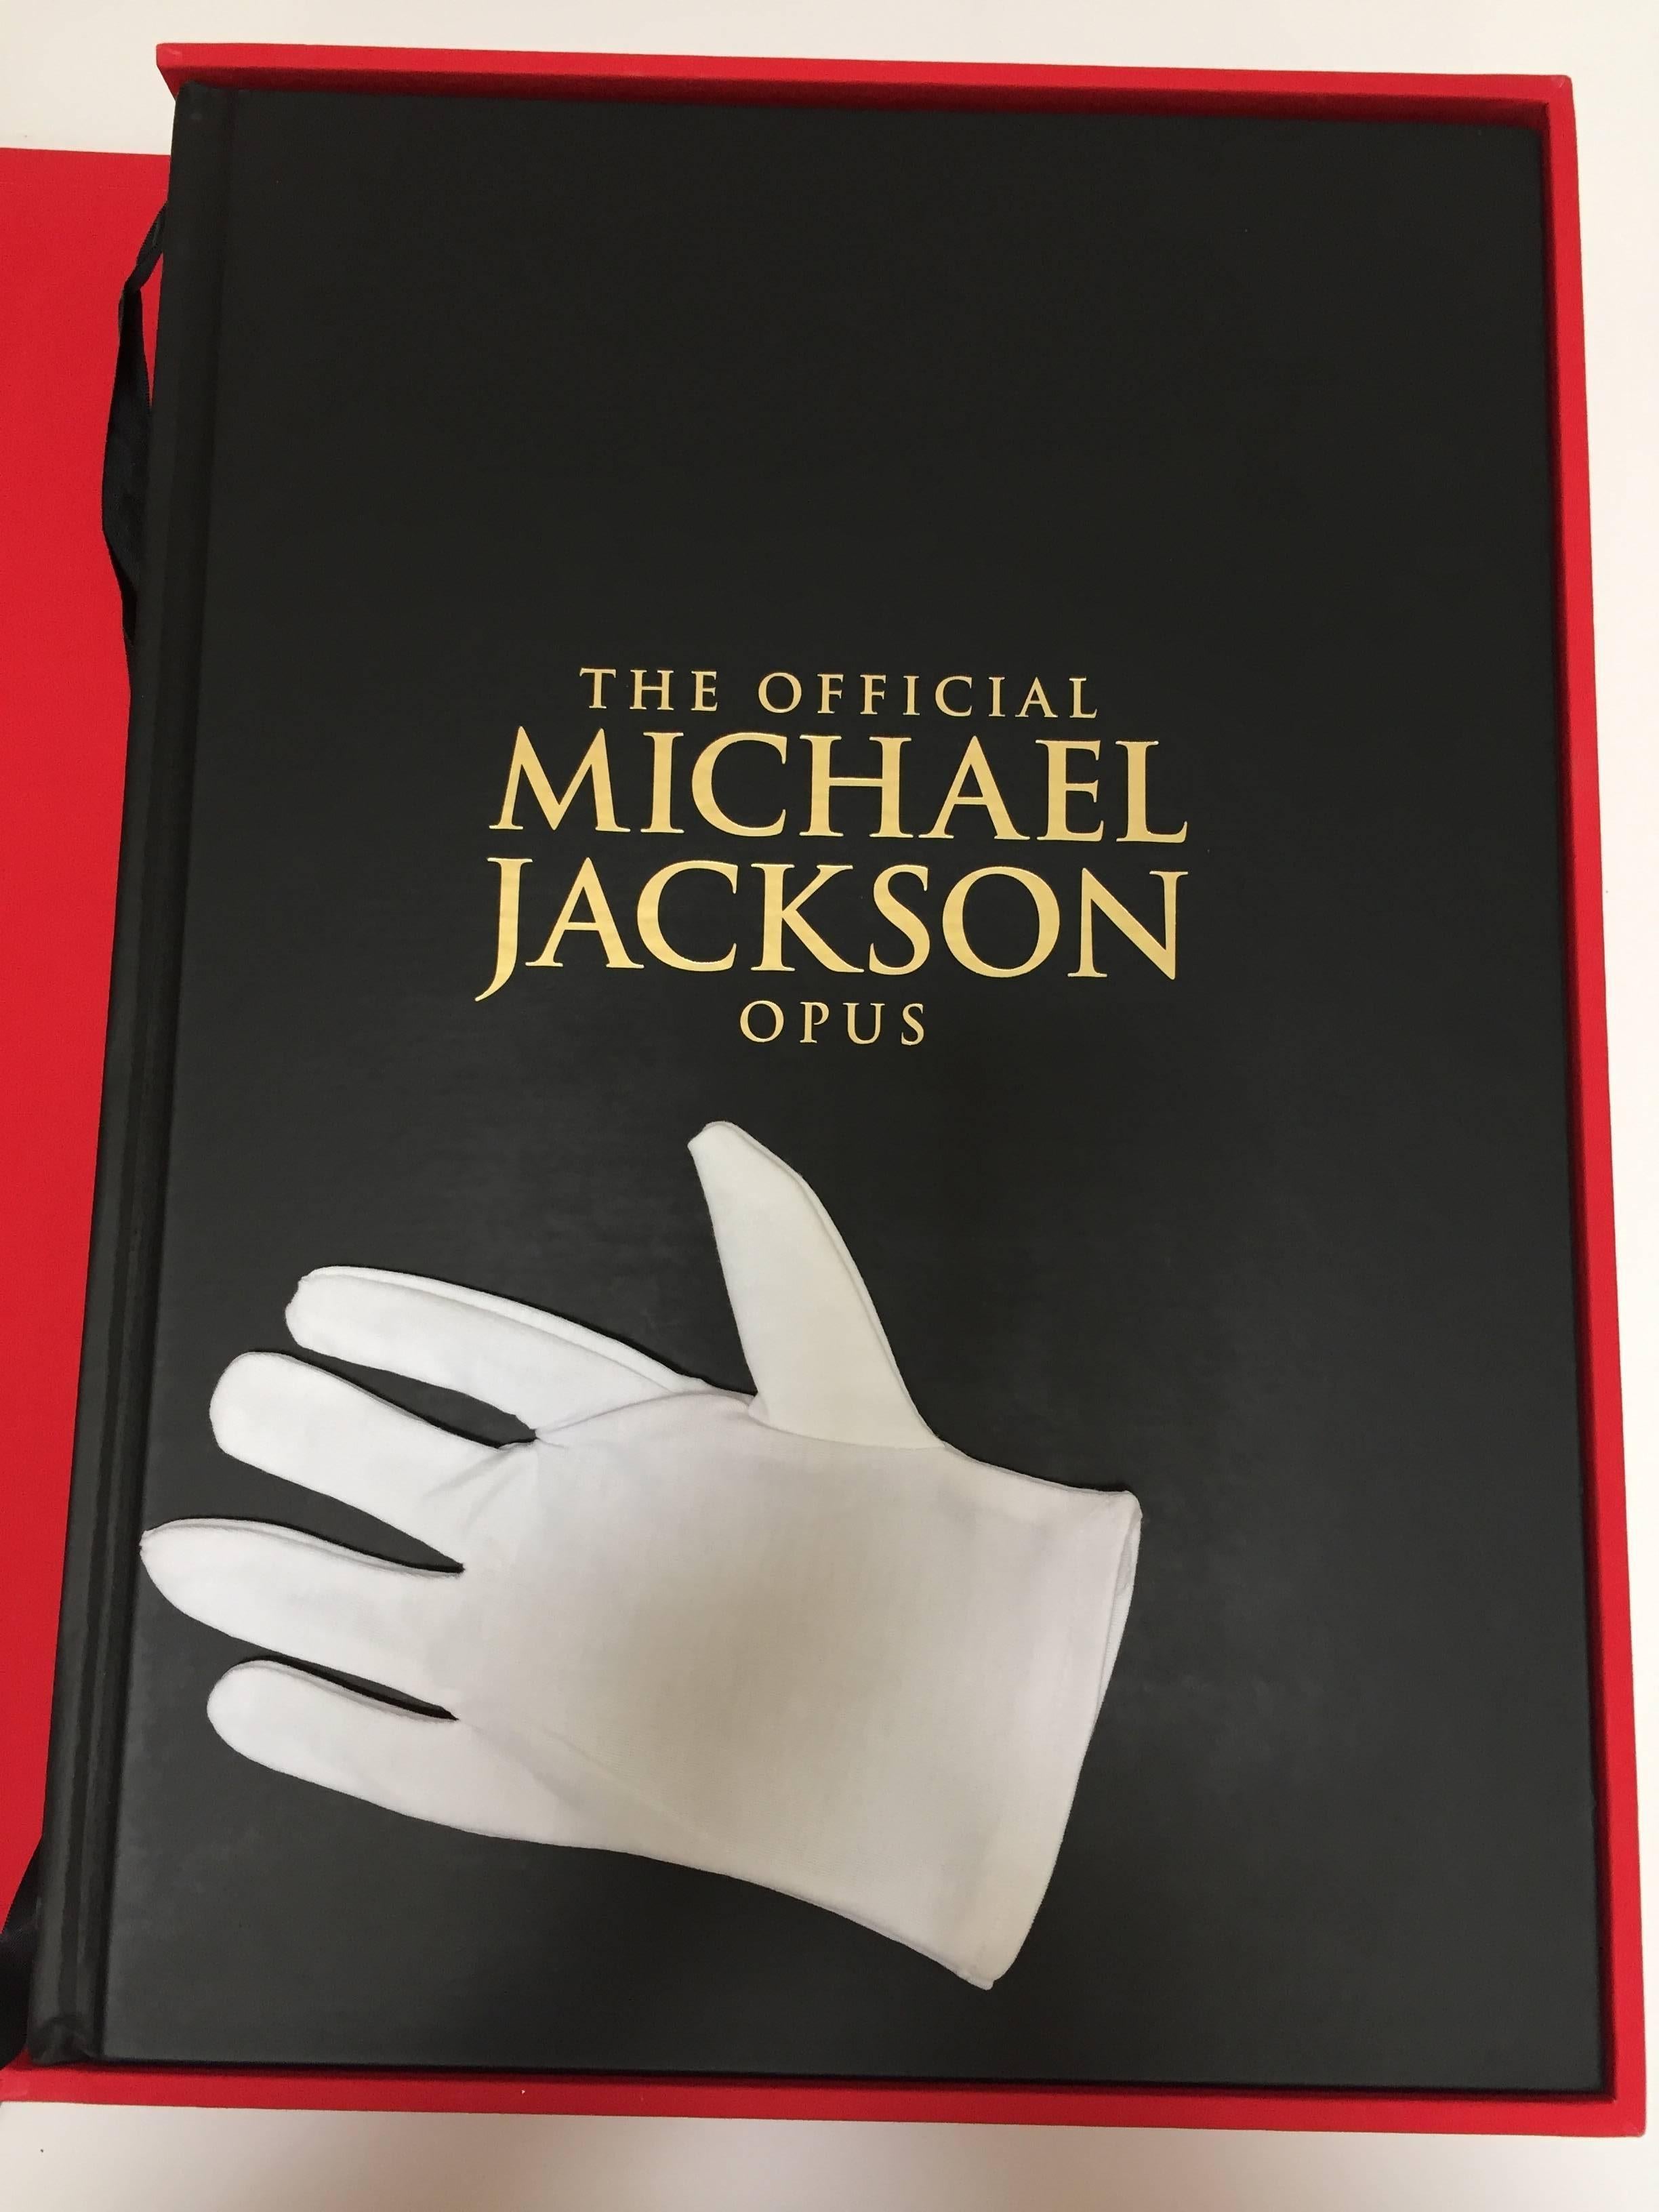 The Official Michael Jackson Opus